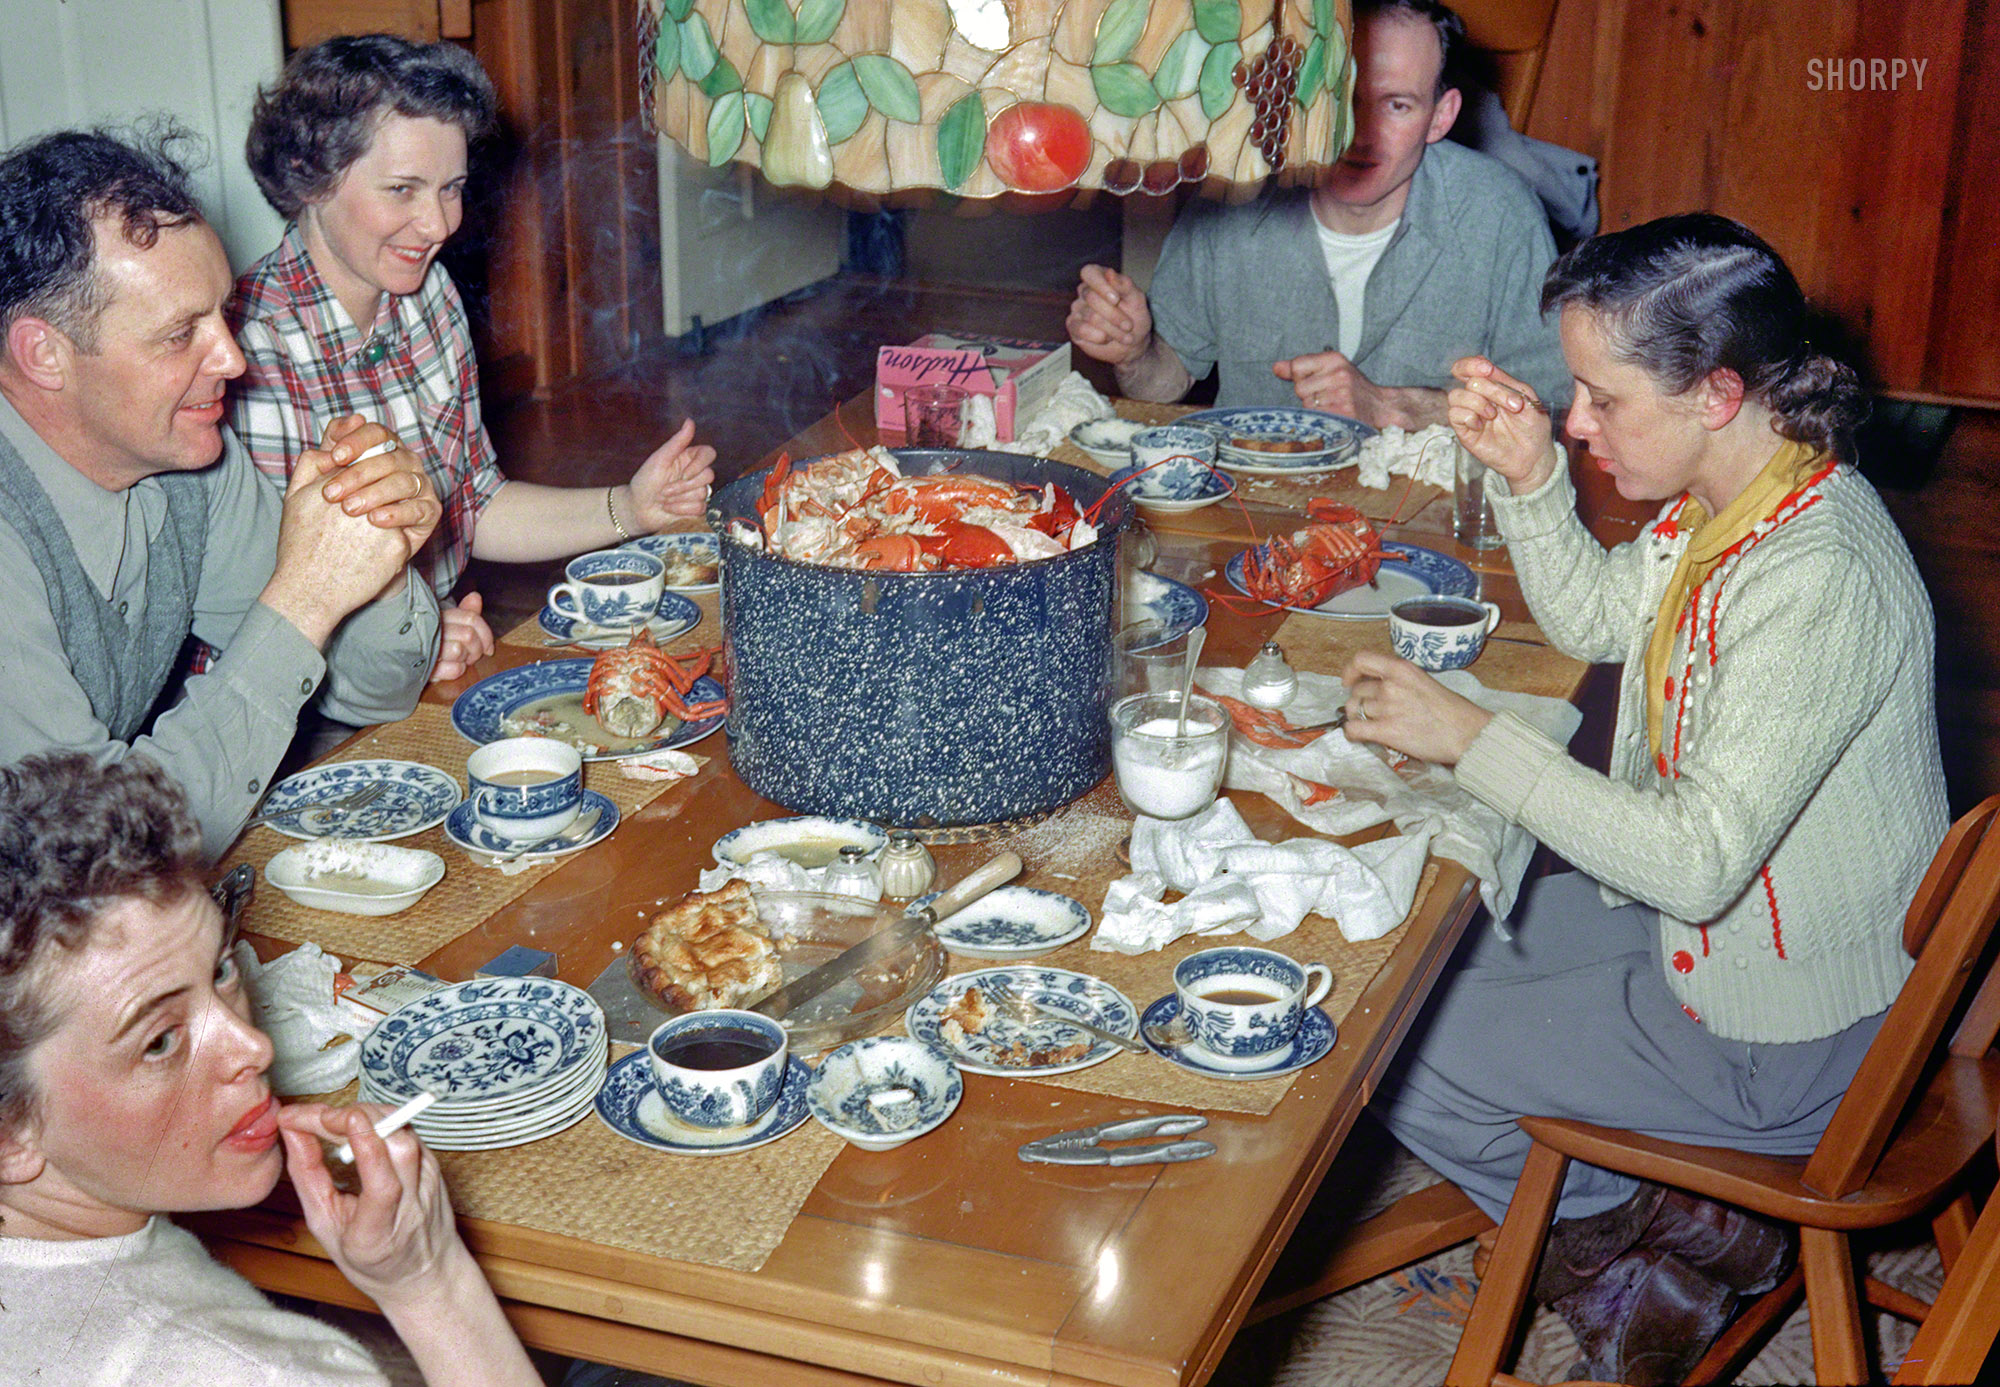 Circa 1955 somewhere in New England comes this unlabeled slide from the Linda Kodachromes and its table of boiled lobster and smoking people. View full size.